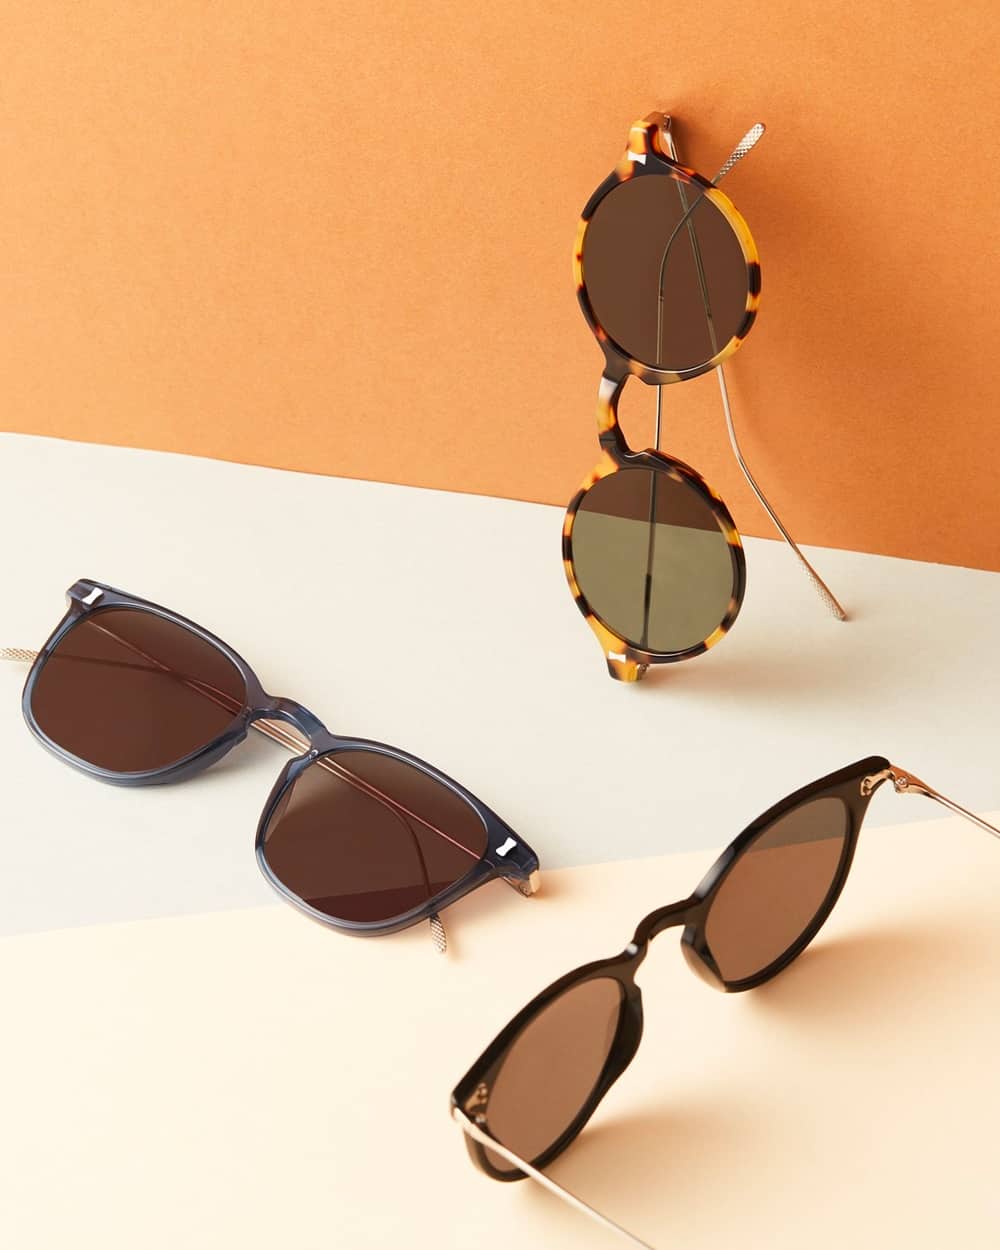 Selection of men's Cubitts sunglasses in blue and tortoiseshell acetate with tinted lenses